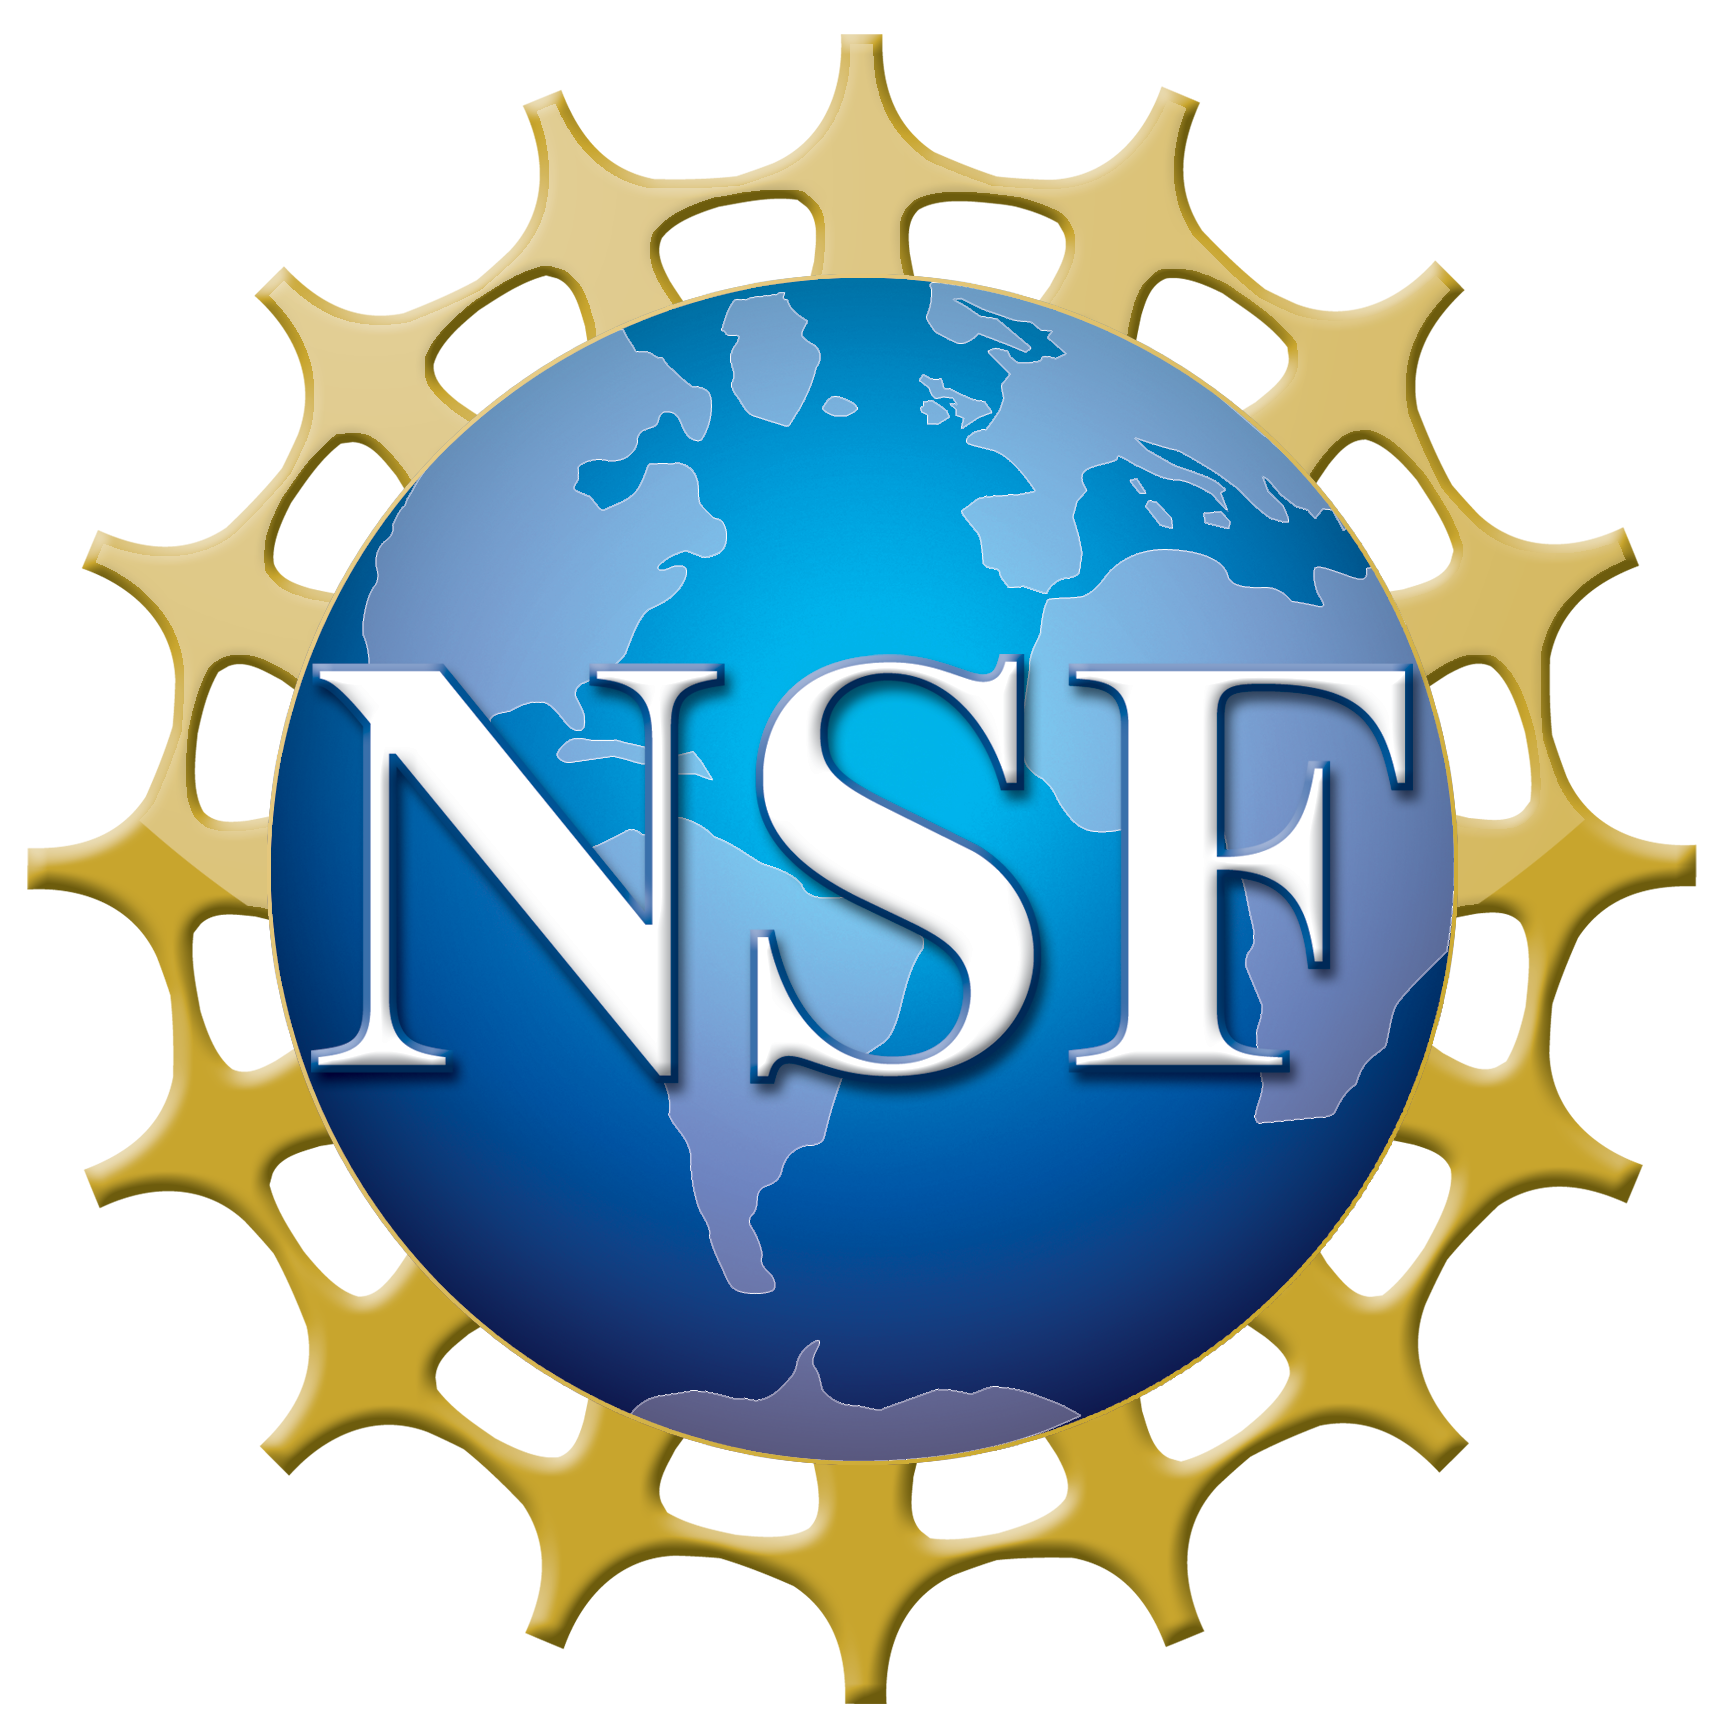 Logo of National Science Foundation